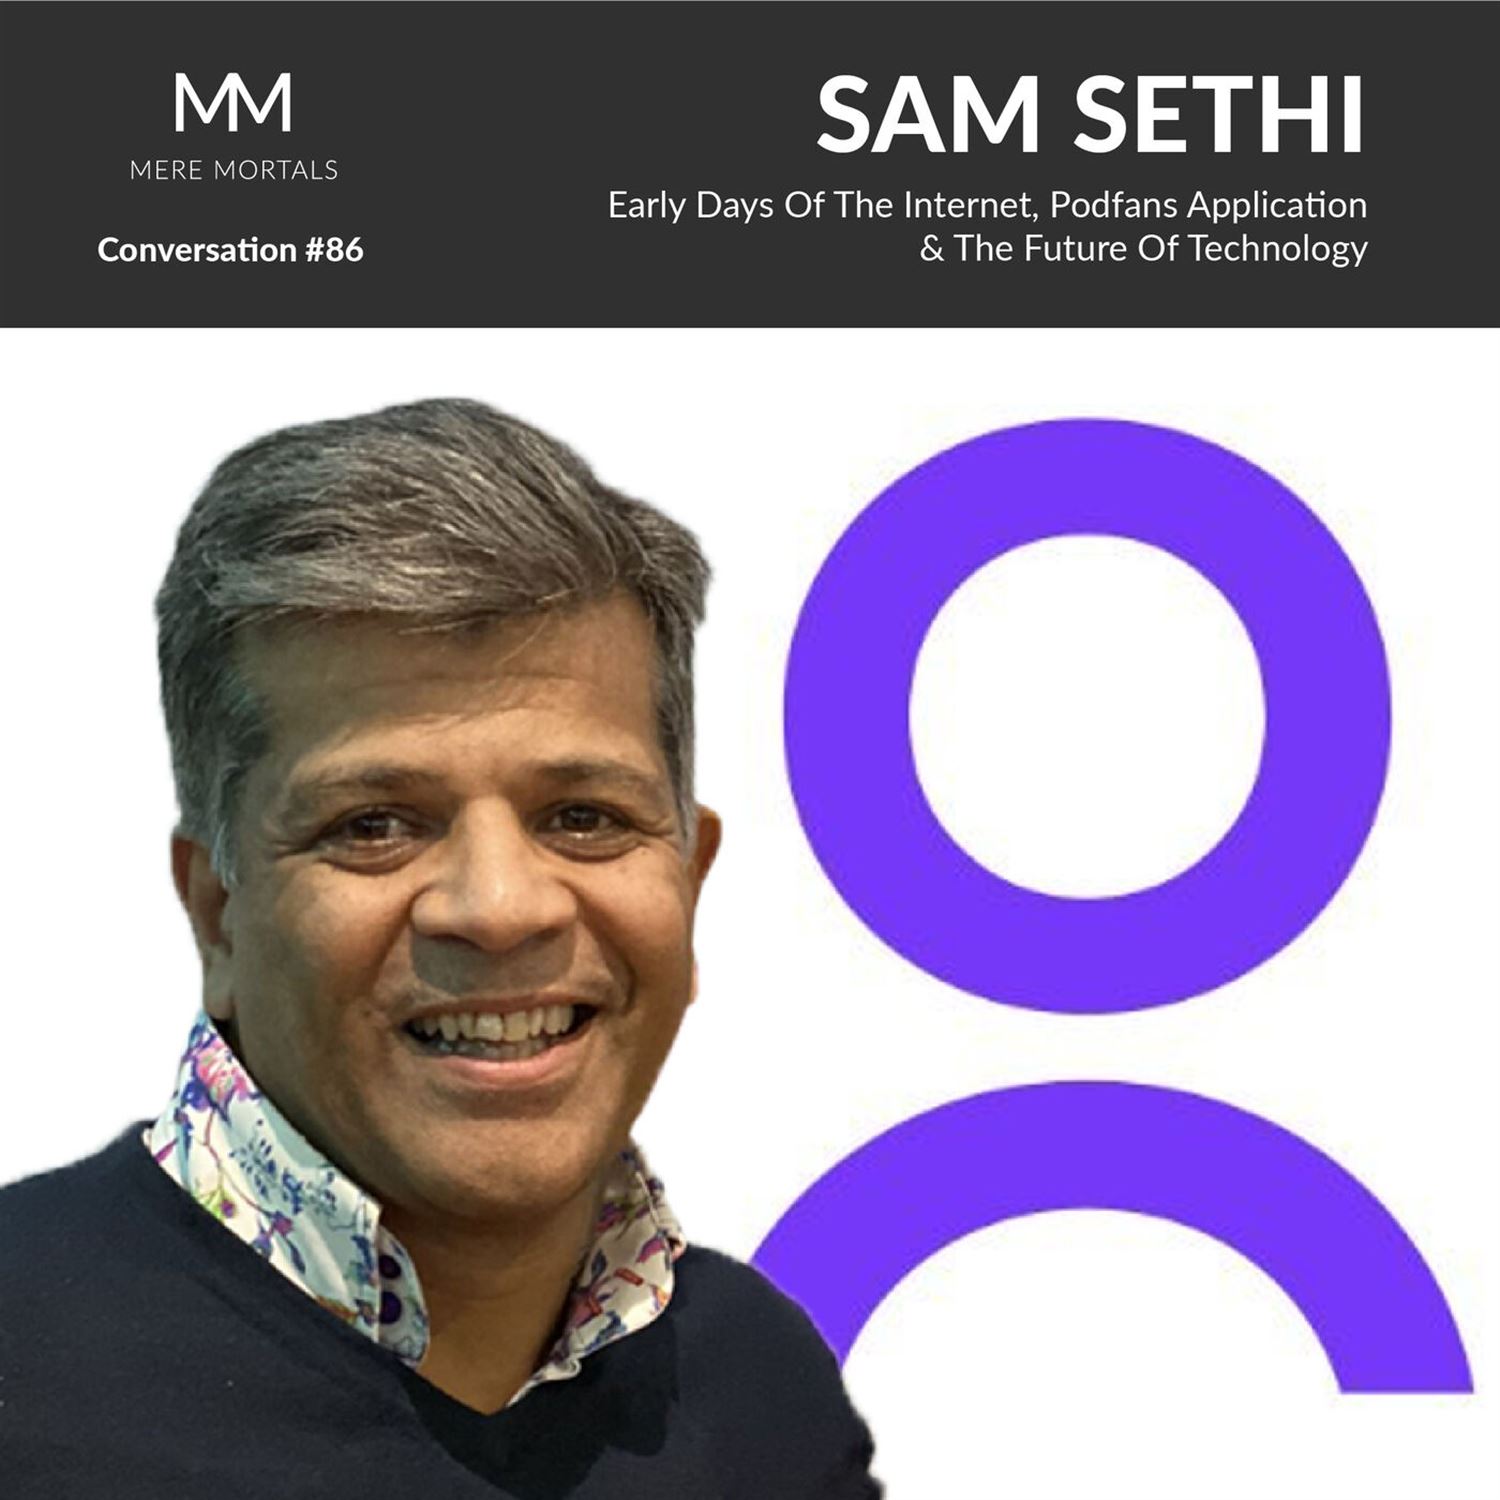 SAM SETHI | Early Days Of The Internet, Podfans Application & The Future Of Technology